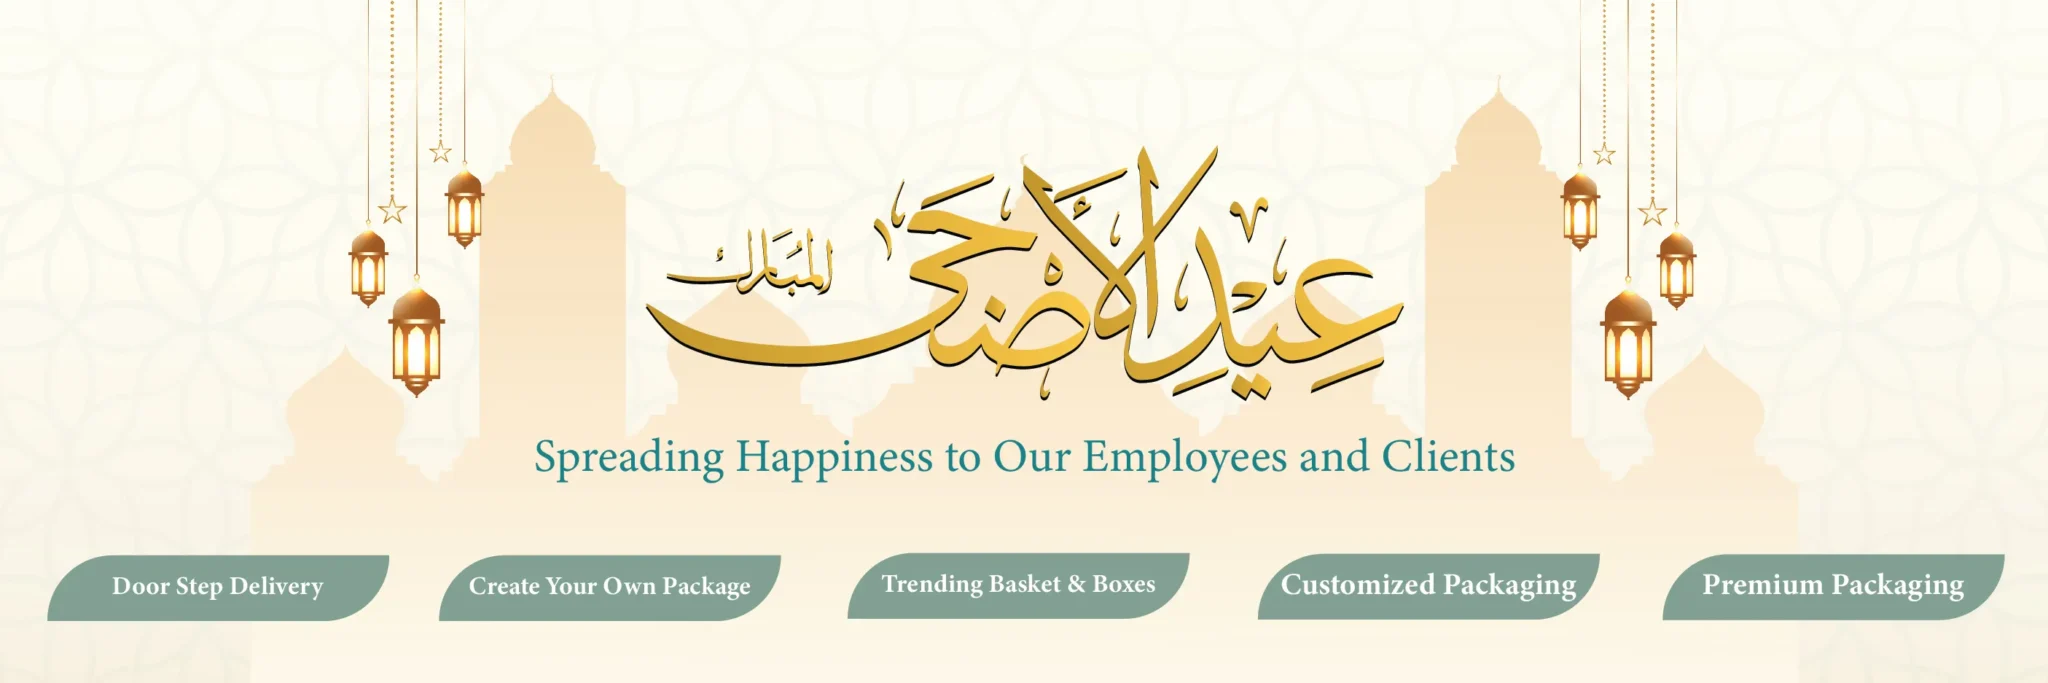 Eid ul Adha Online Corporate Gifts for Clients and Employees